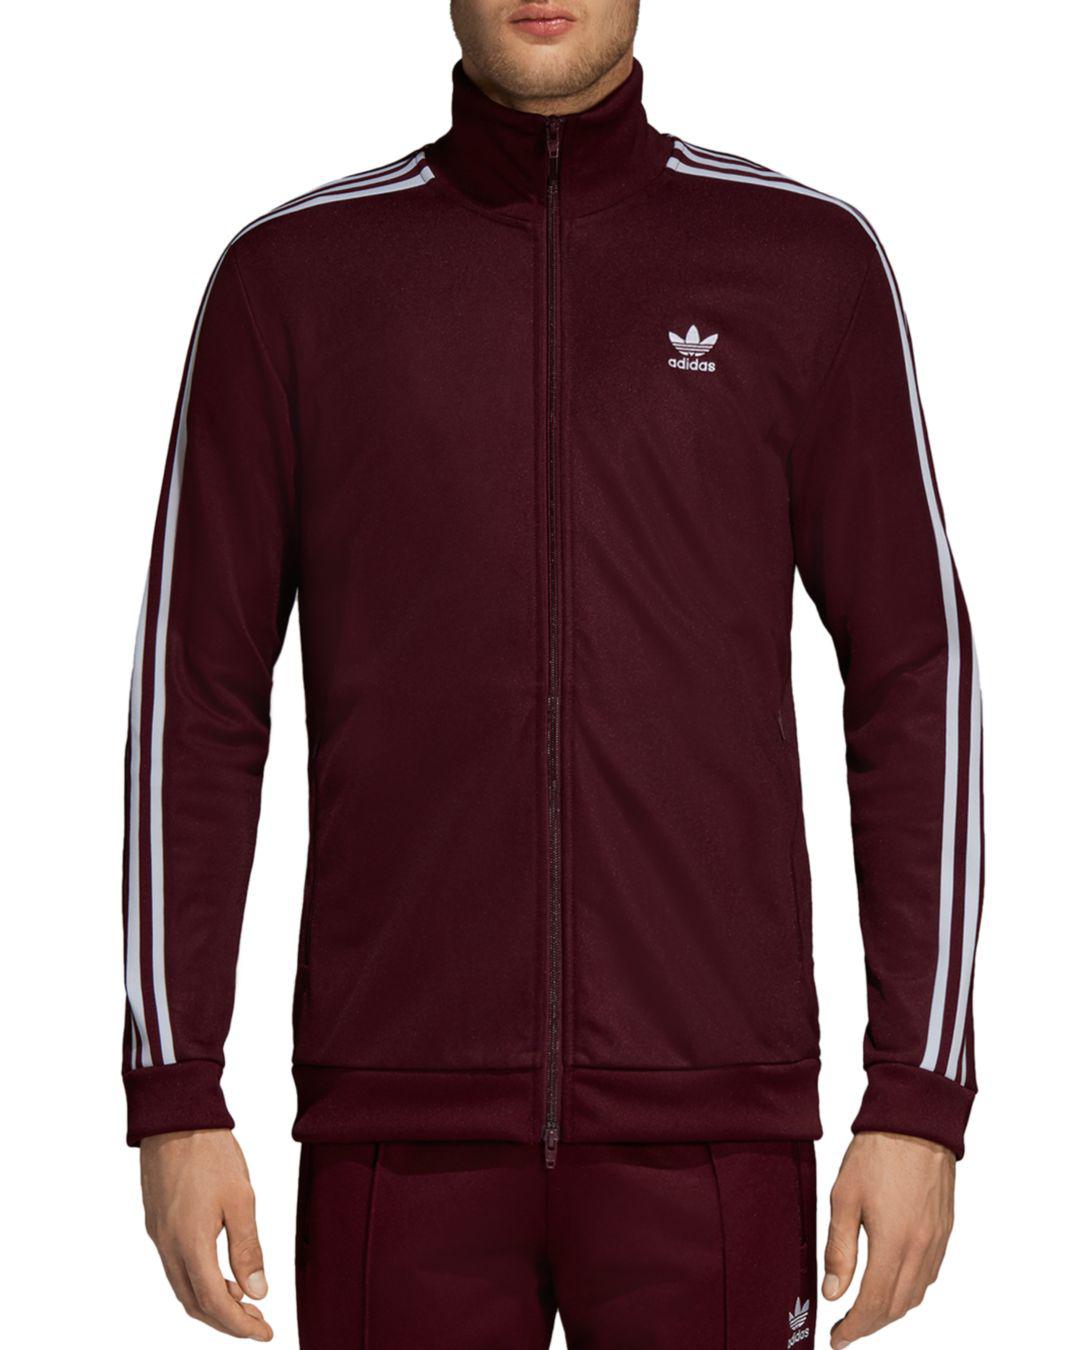 adidas Cotton Adicolor Beckenbauer Track Jacket in Maroon (Red) for Men -  Lyst